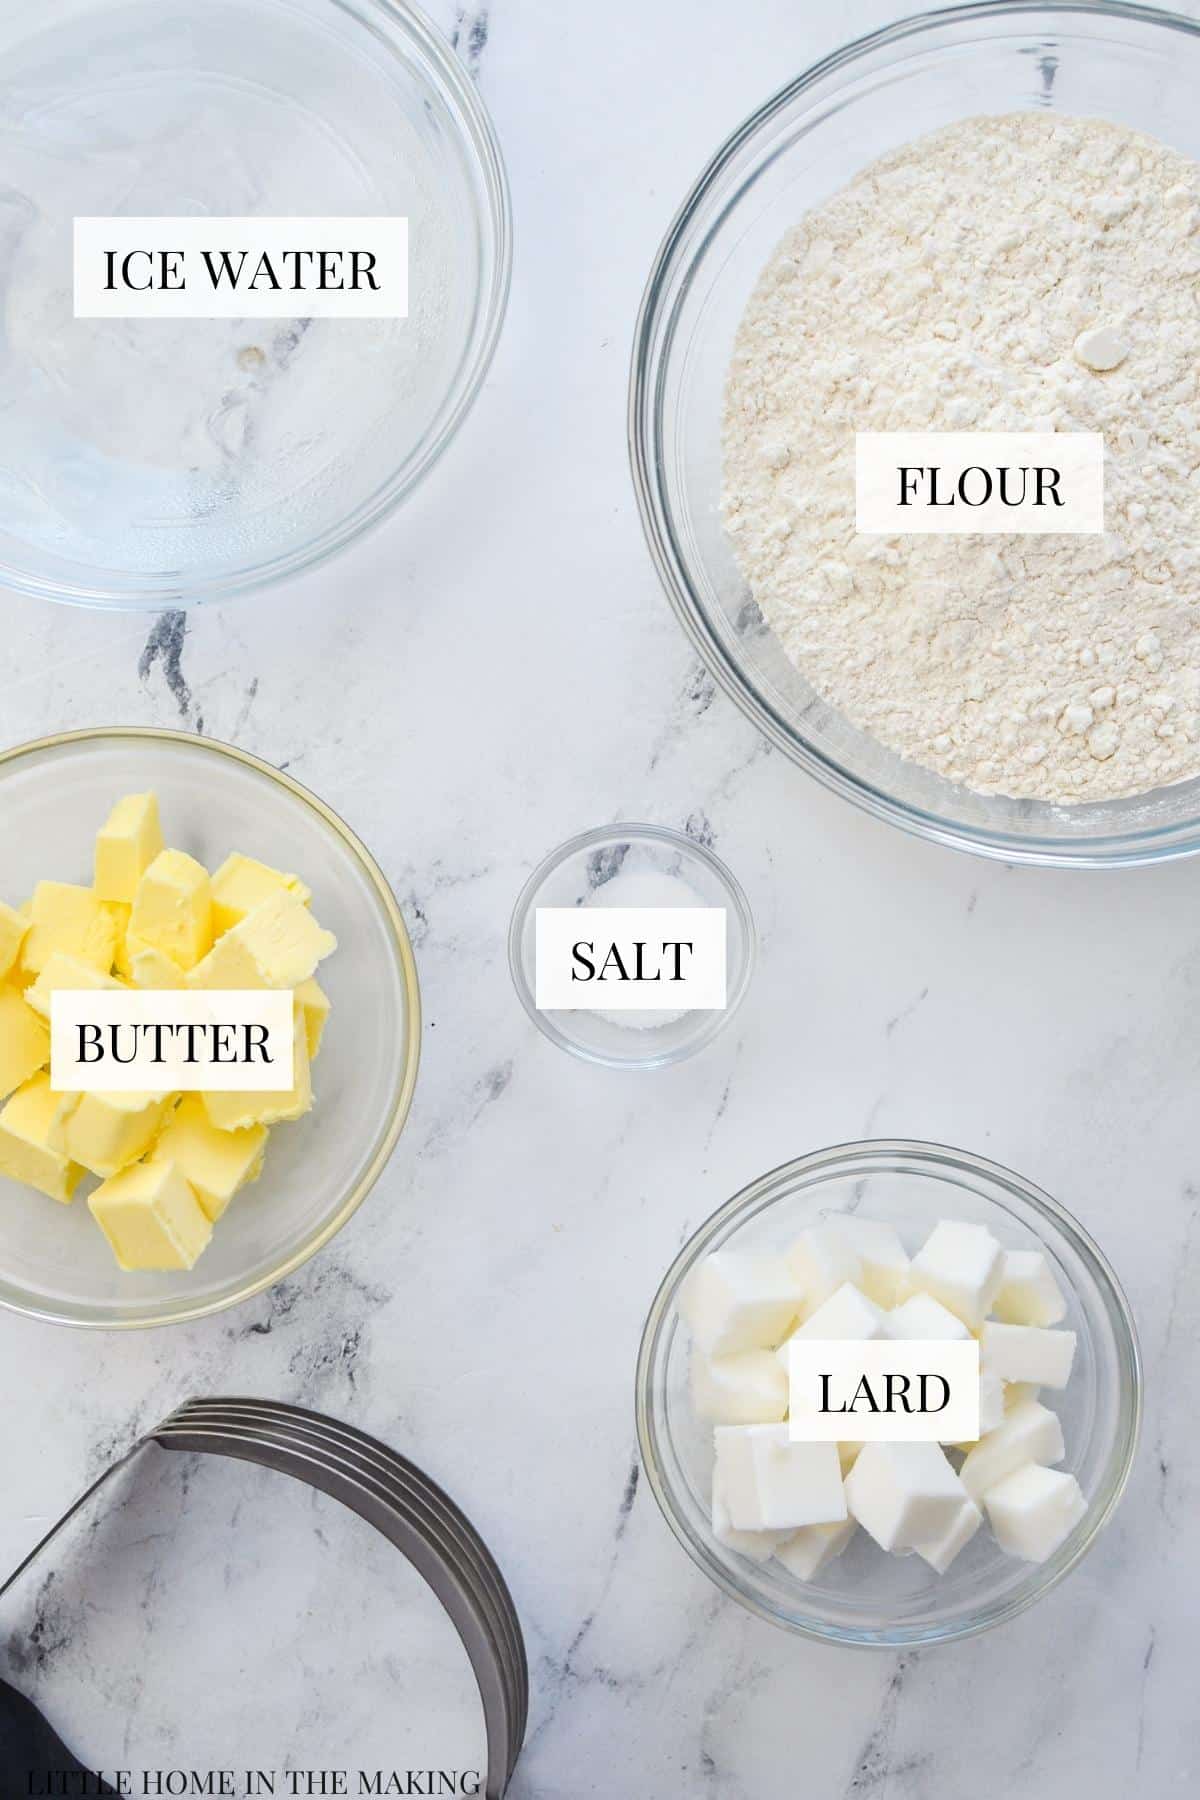 The ingredients needed in order to make a pie crust: butter, flour, ice water, etc.